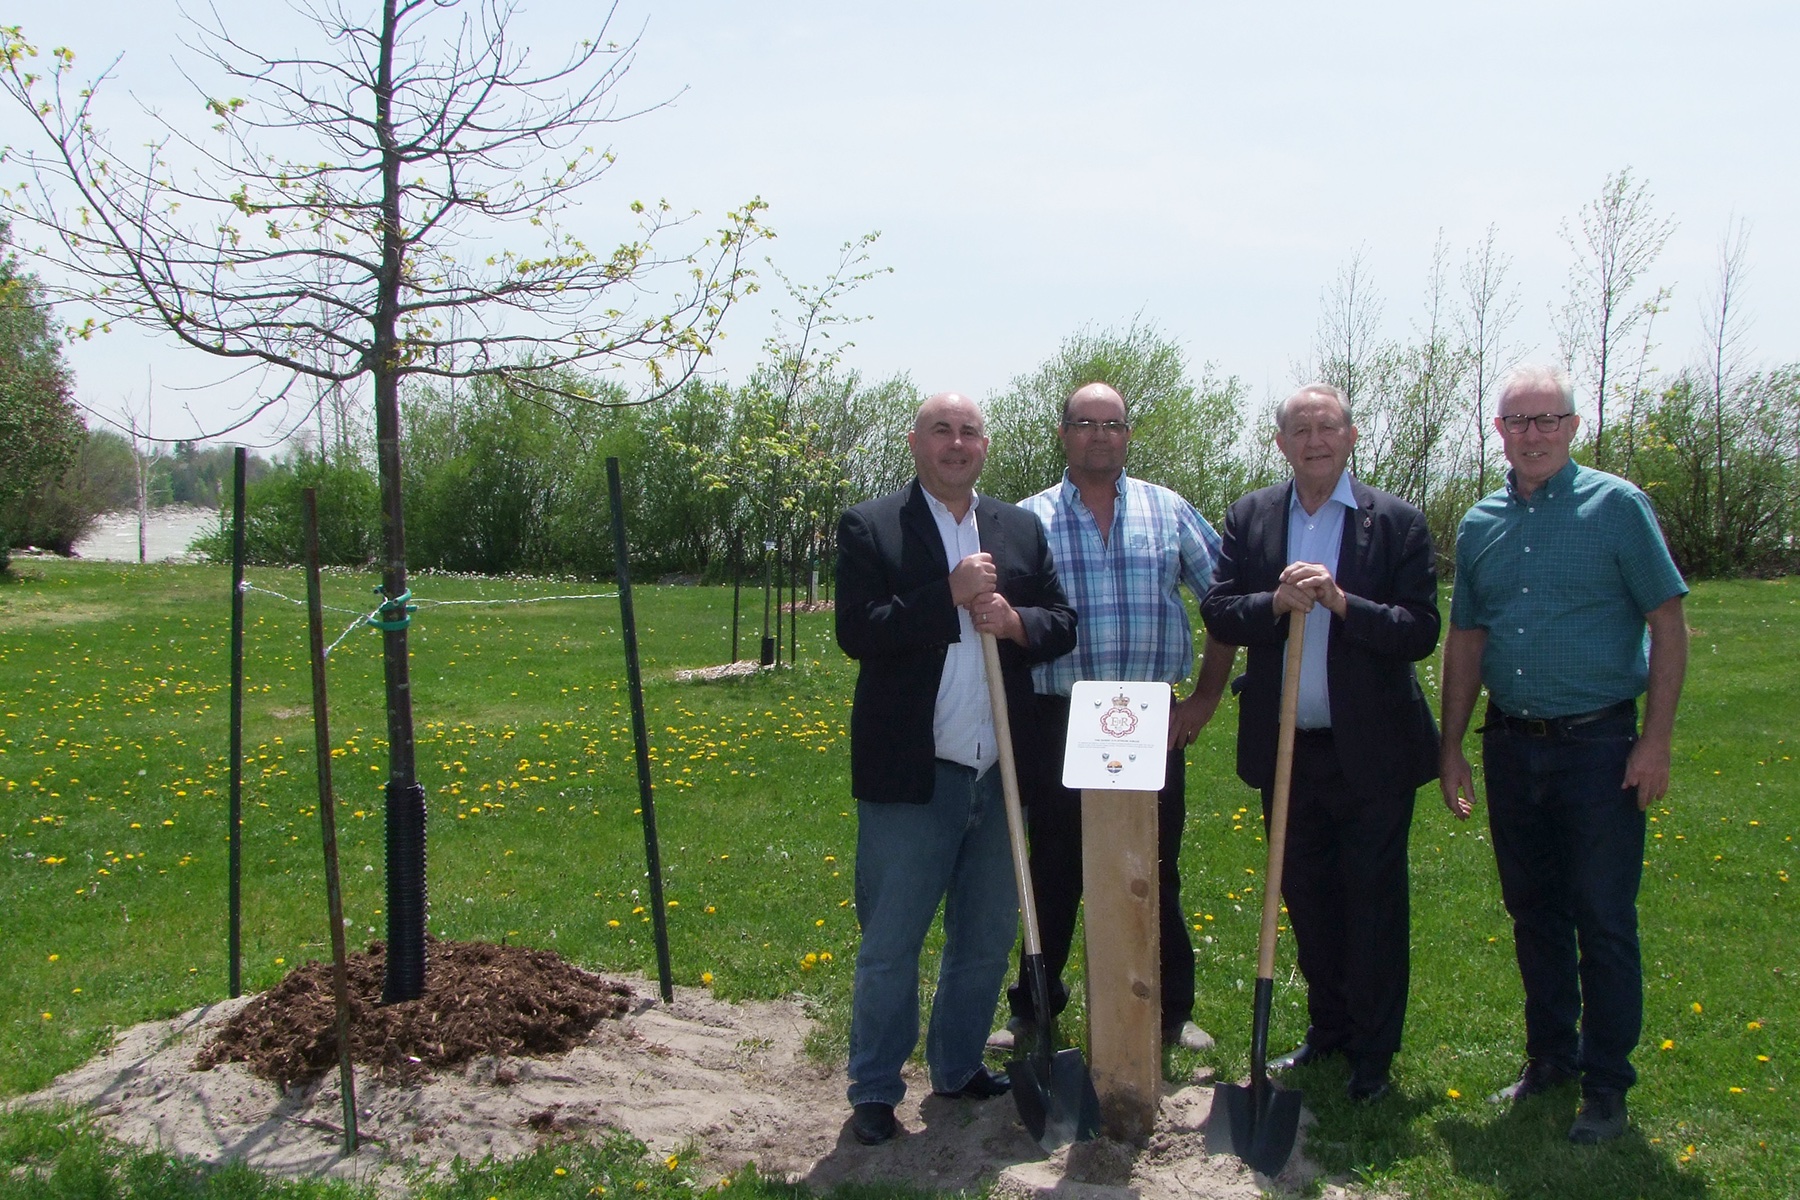 Local township honours Queen’s Platinum Jubilee with tree planting ceremony